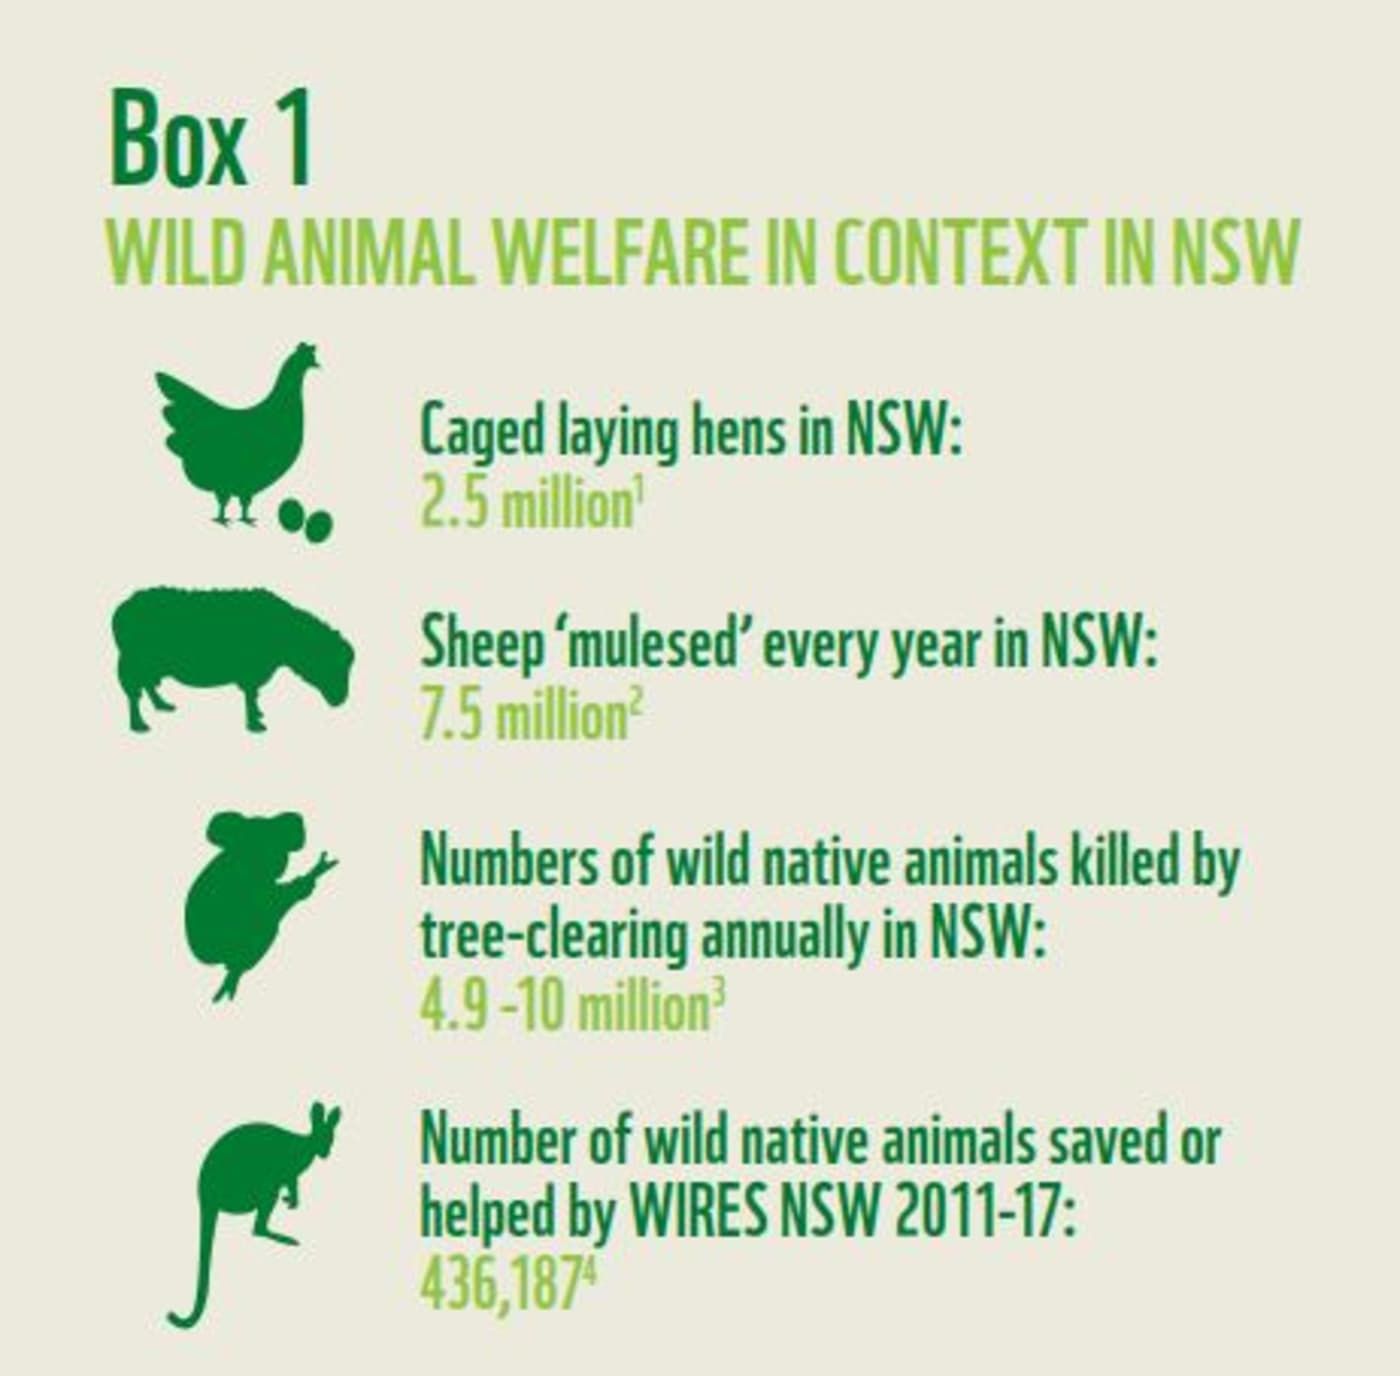 Wild animal welfare in context in NSW